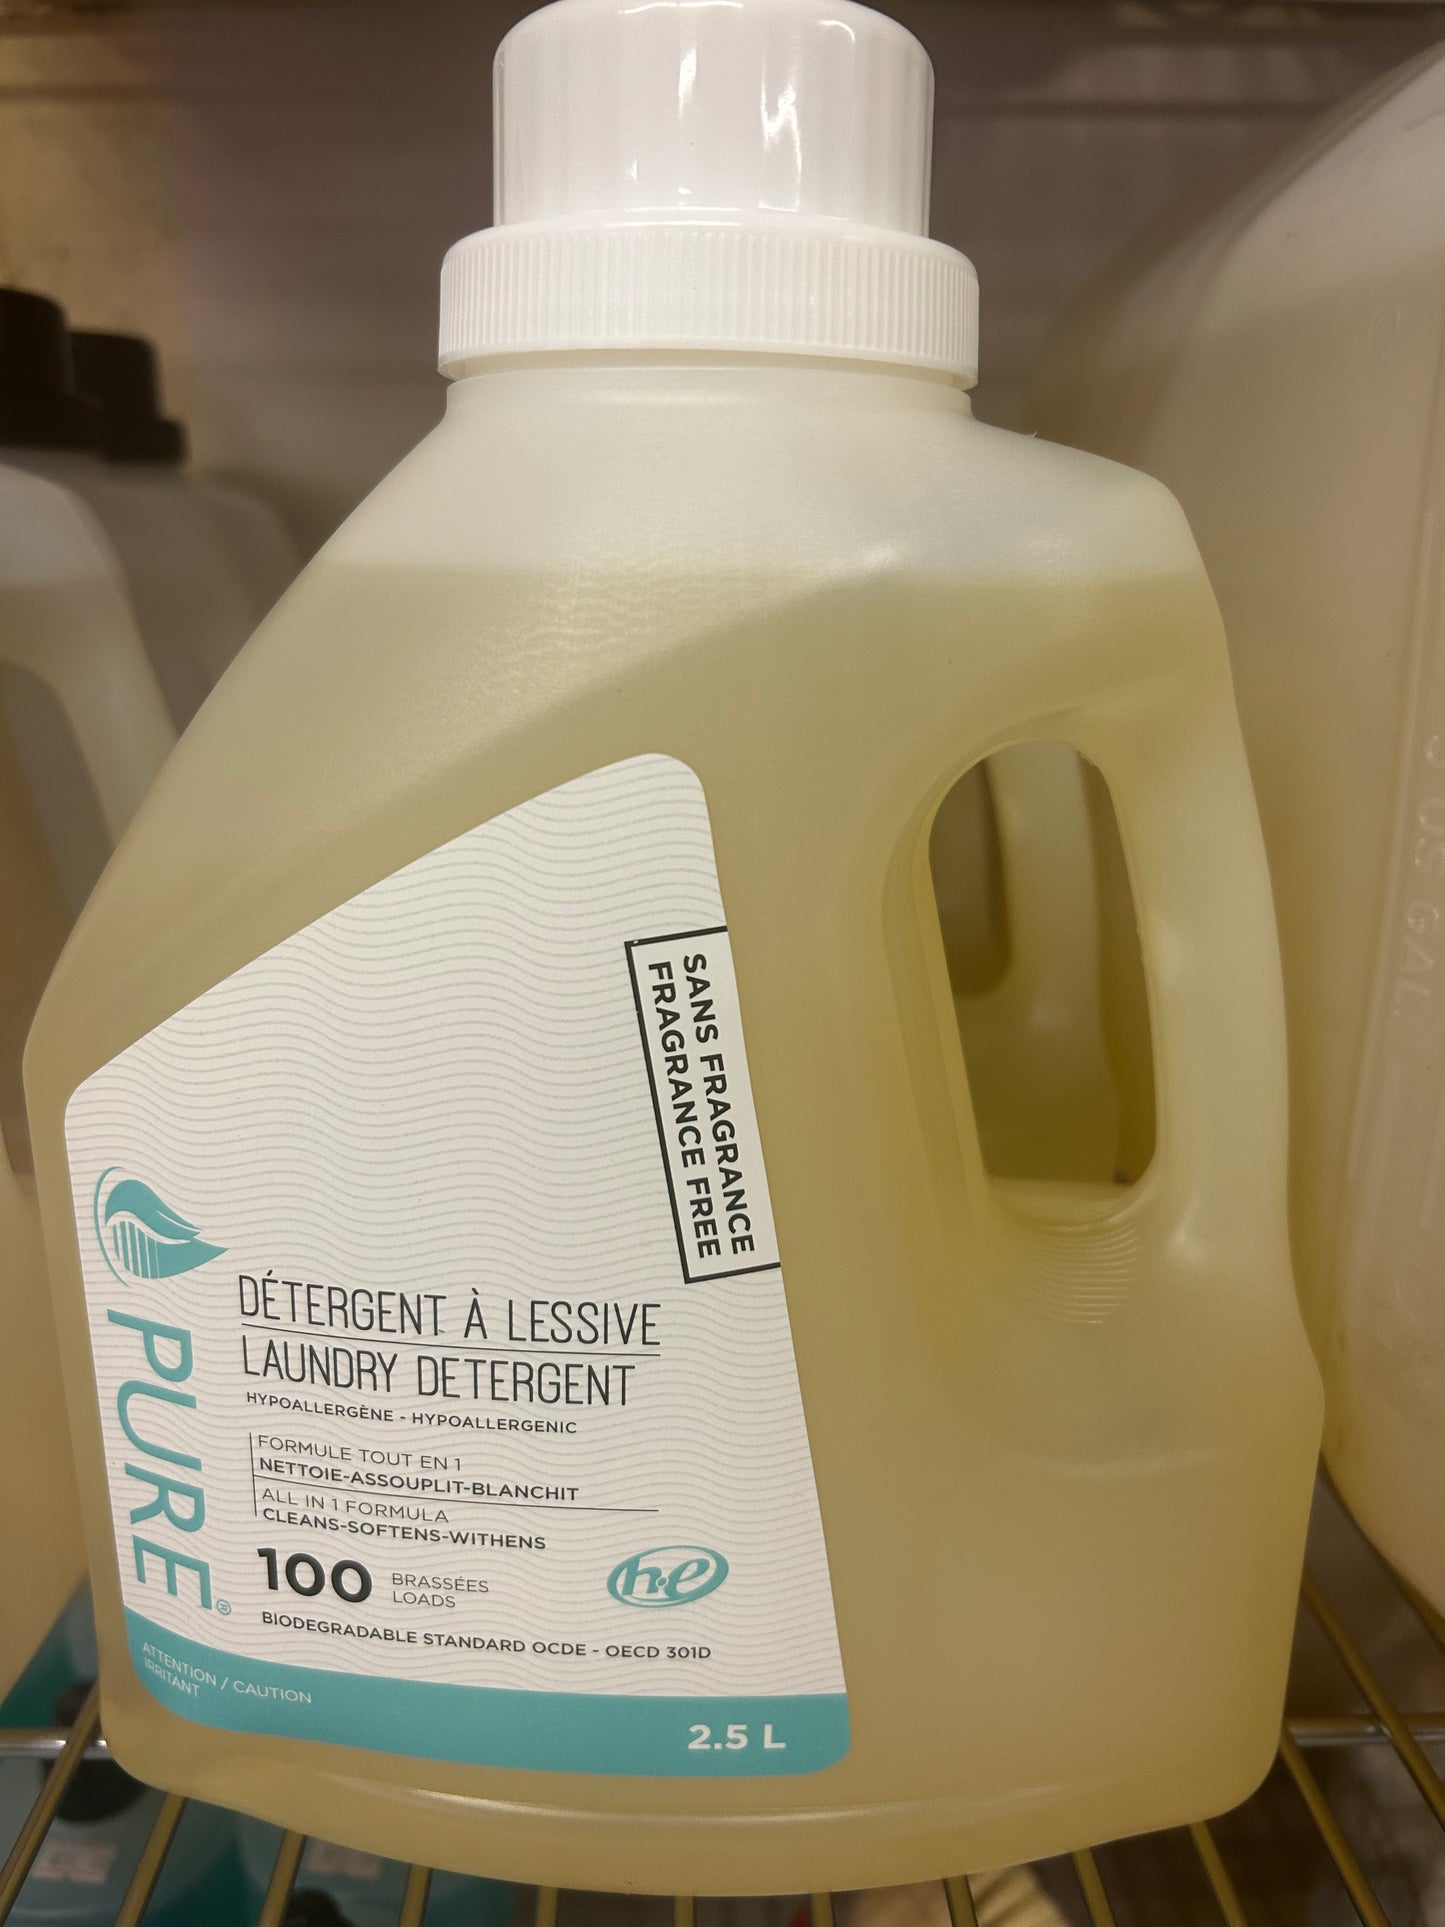 unscented,,,PURE Laundry Detergent is made of ingredients that are good for the environment and for health, in an ultra-concentrated formula. It dissolves 95% in water. That means fewer particles released into nature, and fewer residual particles on clothes.